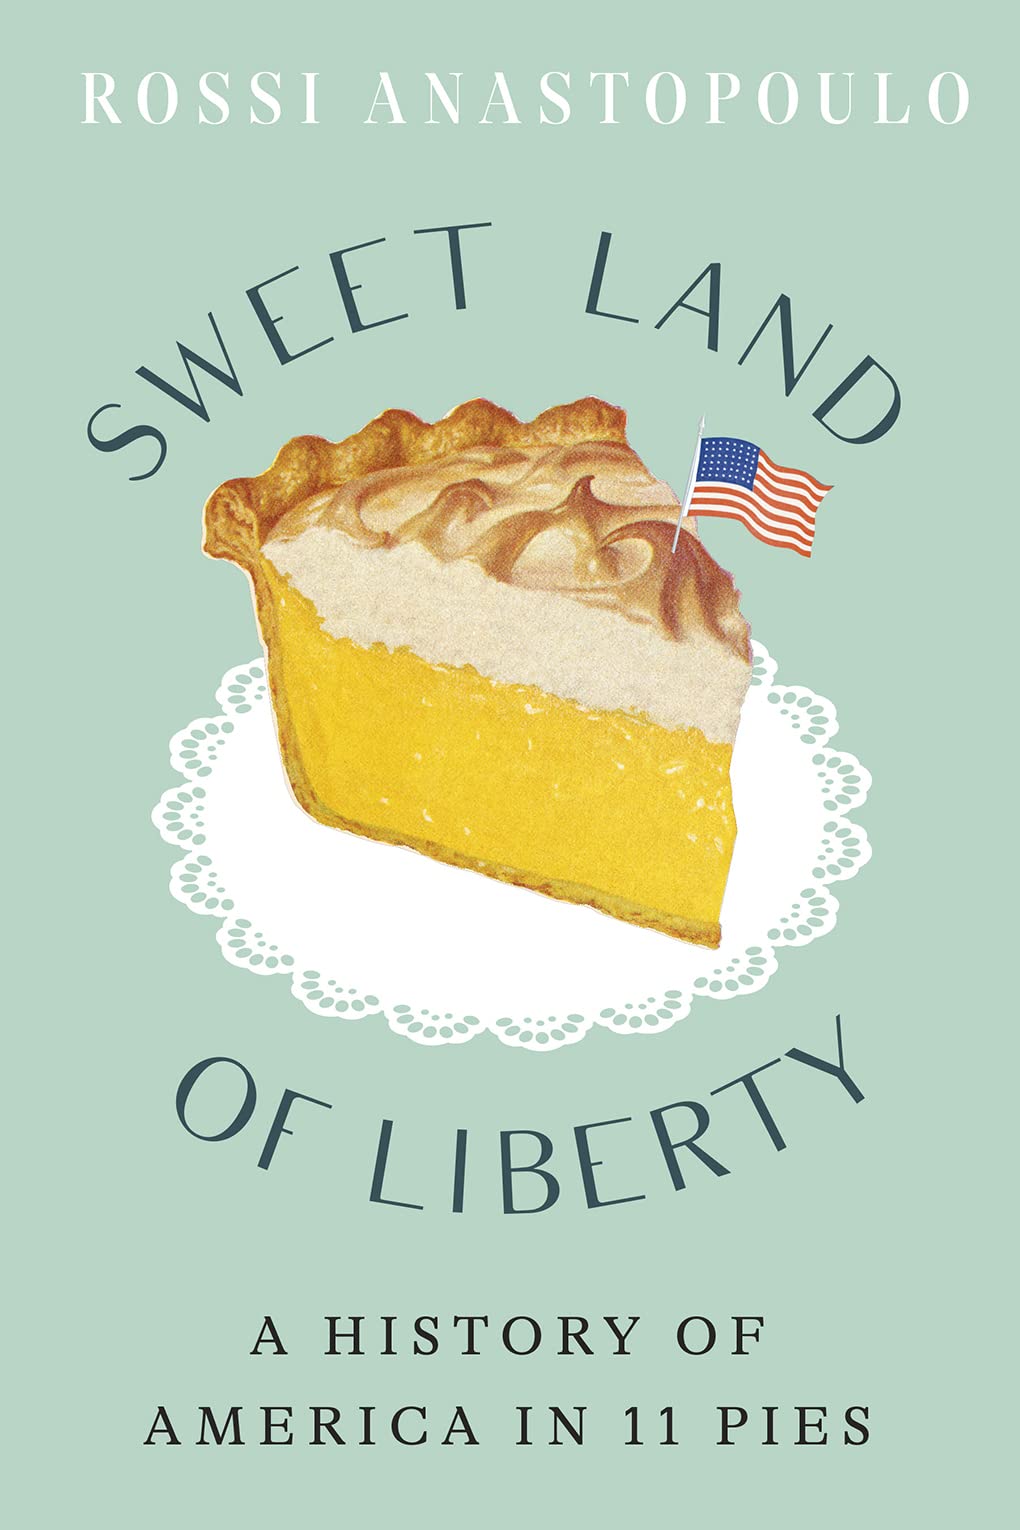 Sweet Land of Liberty: A History of America in 11 Pies (Rossi Anastopoulo)